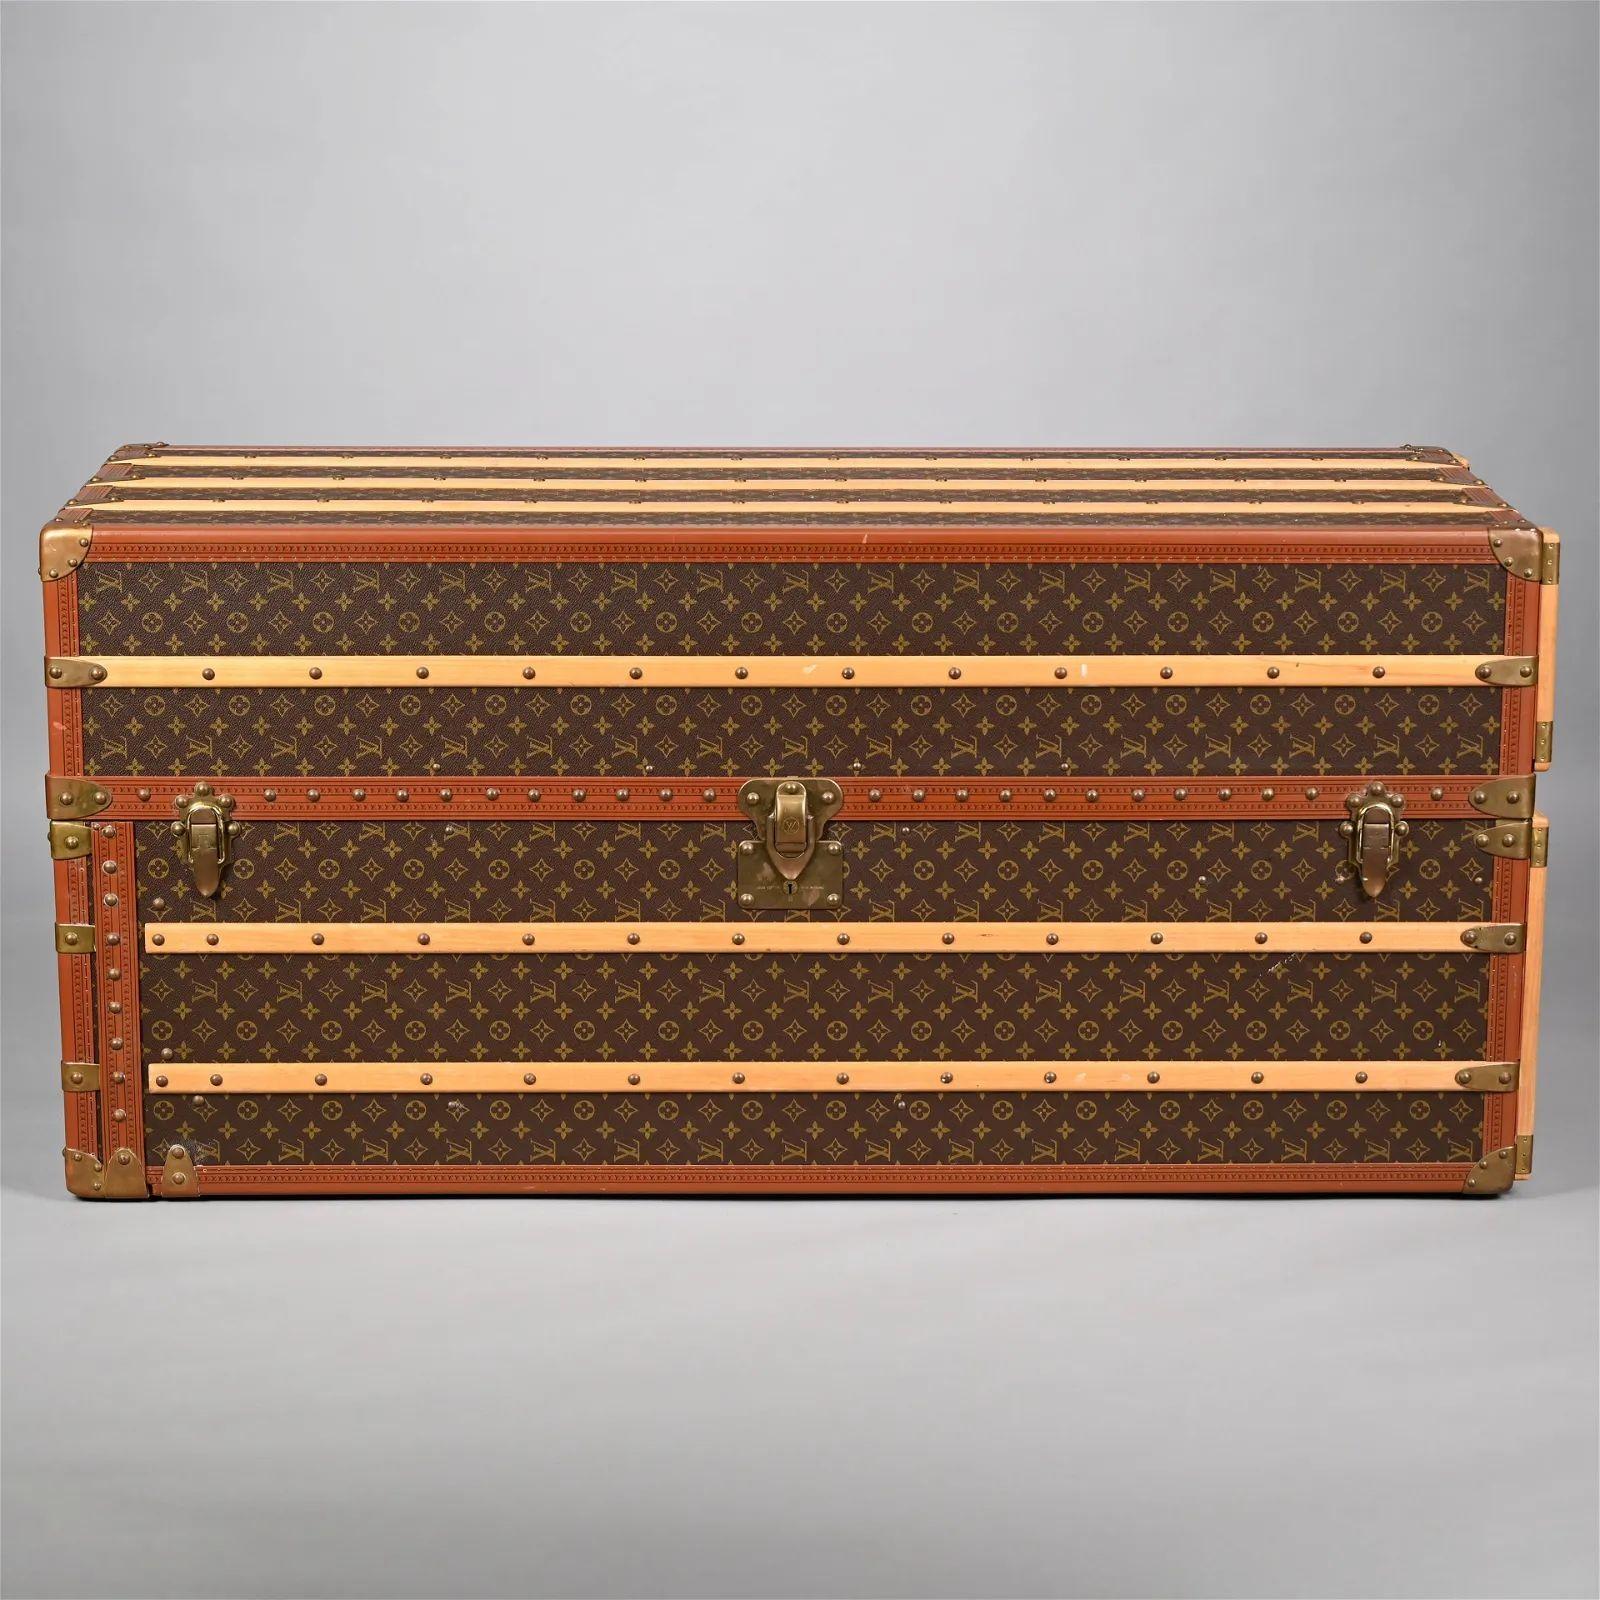 Louis Vuitton, Large Steamer Trunk or Wardrobe Case, Monogram Canvas, Leather, Special Order

We are pleased to offer one of two special order large and impressive Louis Vuitton steamer trunks; both are currently available.

Louis Vuitton Wardrobe